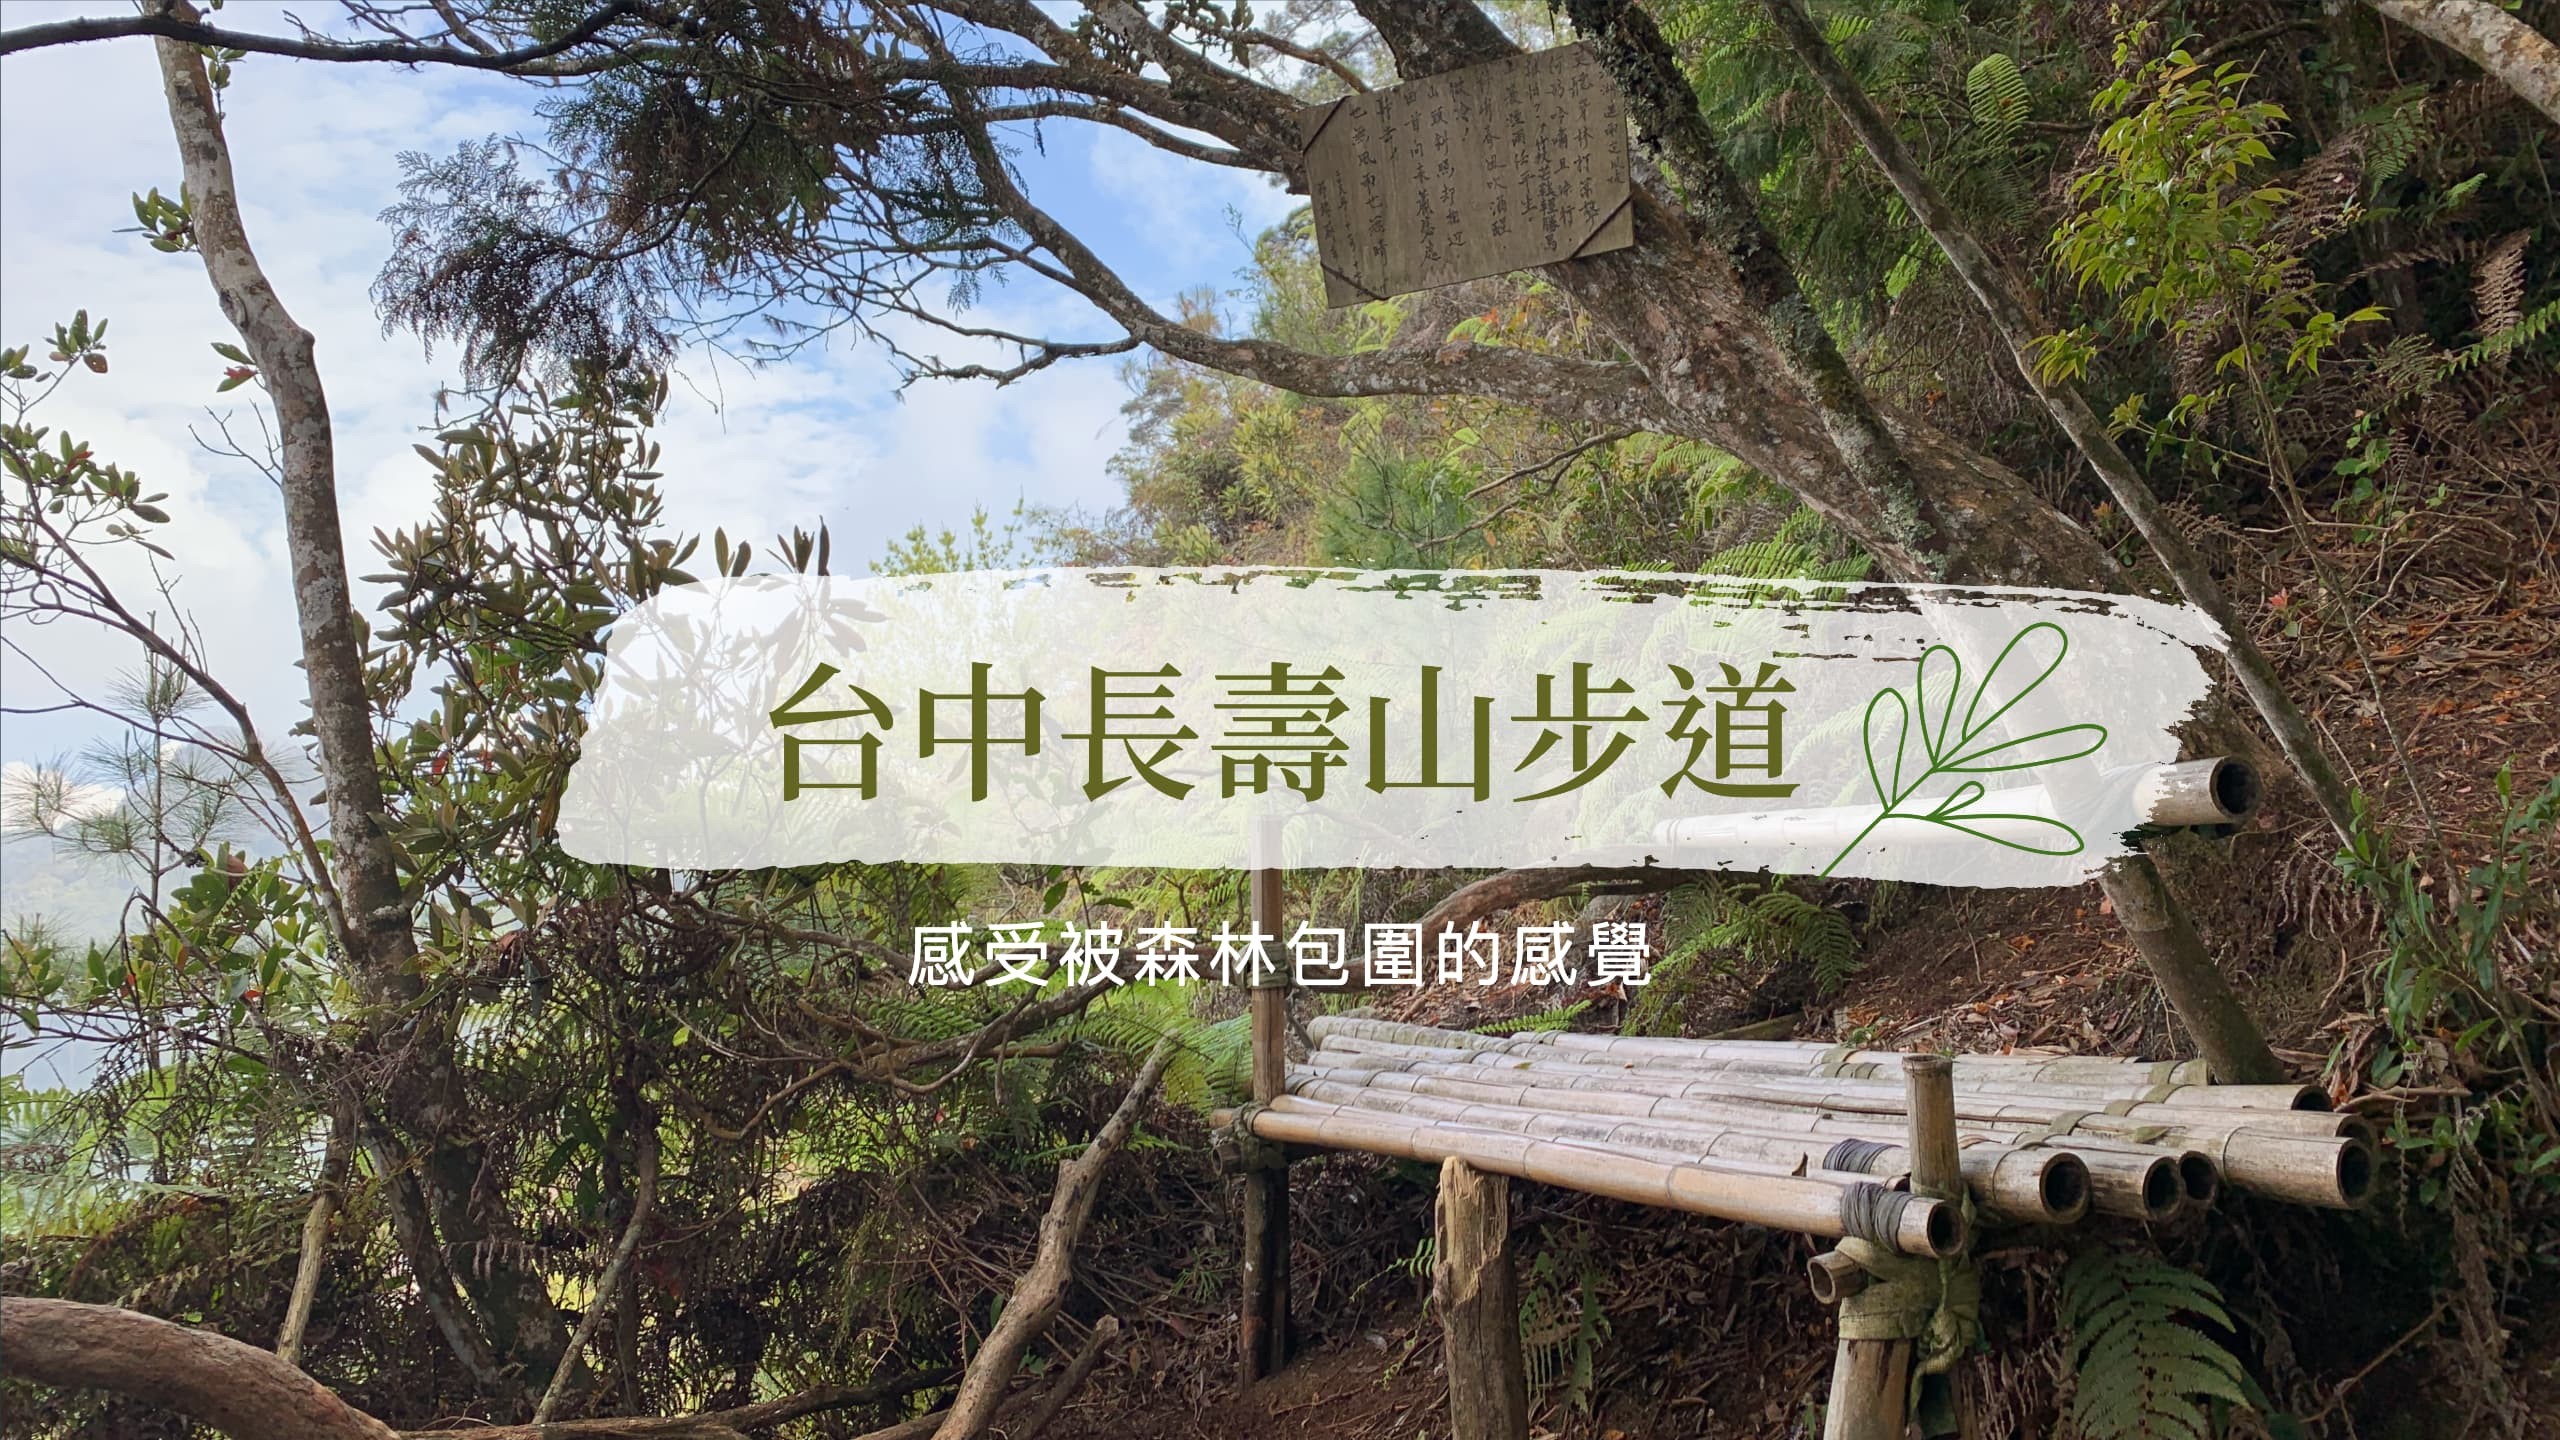 Want to feel the feeling of being surrounded by forests? Just come to Changshou Mountain!